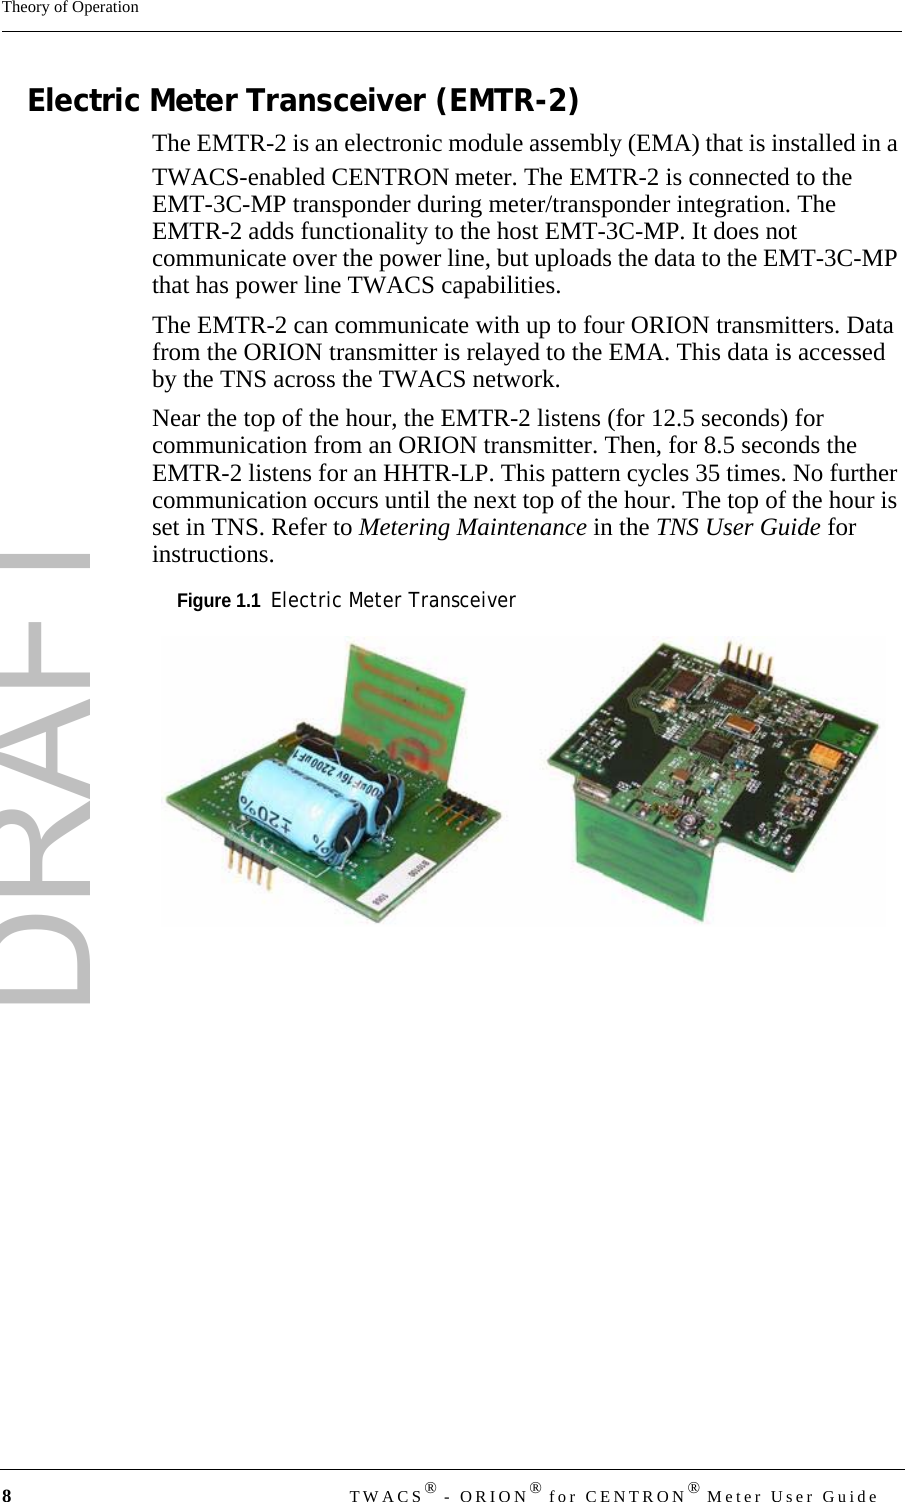 DRAFT8TWACS® - ORION® for CENTRON® Meter User GuideTheory of OperationElectric Meter Transceiver (EMTR-2)The EMTR-2 is an electronic module assembly (EMA) that is installed in a TWACS-enabled CENTRON meter. The EMTR-2 is connected to the EMT-3C-MP transponder during meter/transponder integration. The EMTR-2 adds functionality to the host EMT-3C-MP. It does not communicate over the power line, but uploads the data to the EMT-3C-MP that has power line TWACS capabilities. The EMTR-2 can communicate with up to four ORION transmitters. Data from the ORION transmitter is relayed to the EMA. This data is accessed by the TNS across the TWACS network.Near the top of the hour, the EMTR-2 listens (for 12.5 seconds) for communication from an ORION transmitter. Then, for 8.5 seconds the EMTR-2 listens for an HHTR-LP. This pattern cycles 35 times. No further communication occurs until the next top of the hour. The top of the hour is set in TNS. Refer to Metering Maintenance in the TNS User Guide for instructions.Figure 1.1  Electric Meter Transceiver  